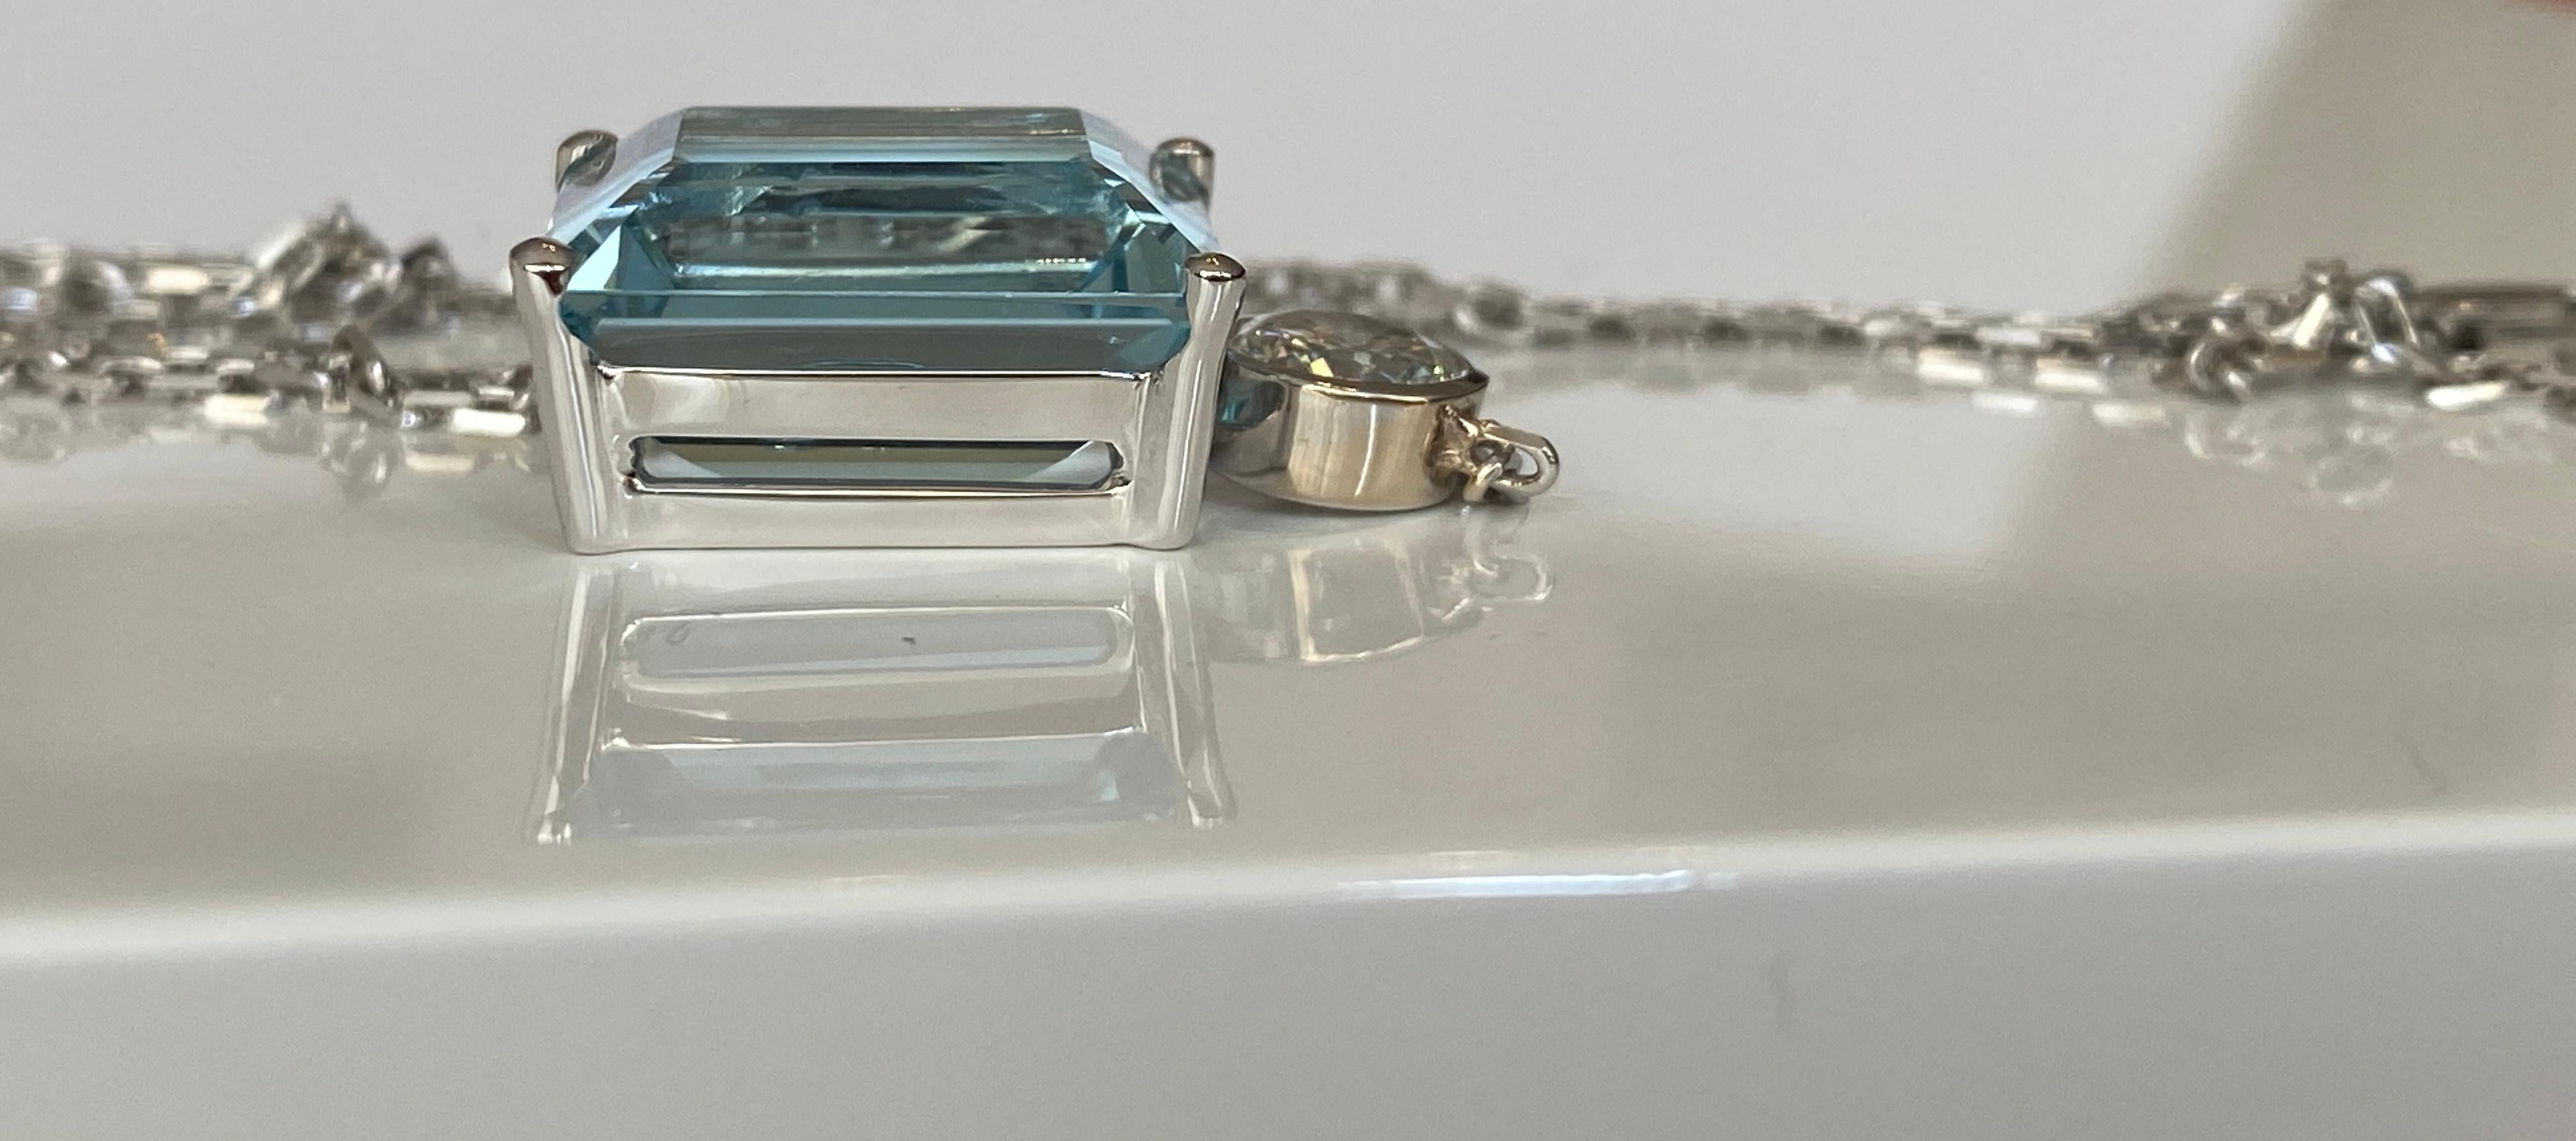 18 Karat White Gold Necklace with a Diamond Pendant Decorated with Aquamarine  For Sale 7